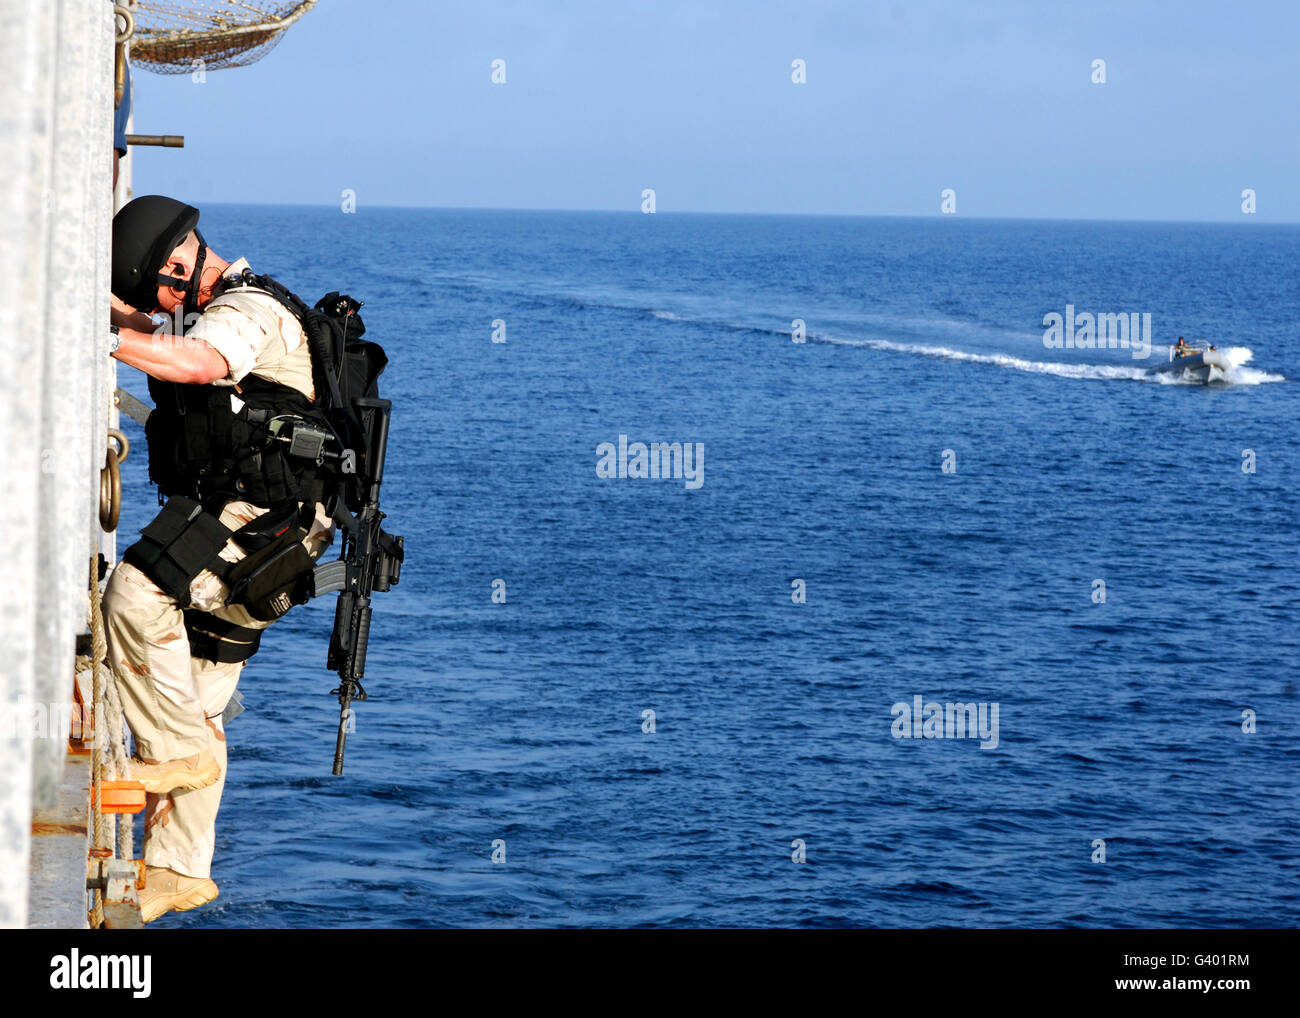 A sailor climbs down the side of the ship into an inflatable boat. Stock Photo